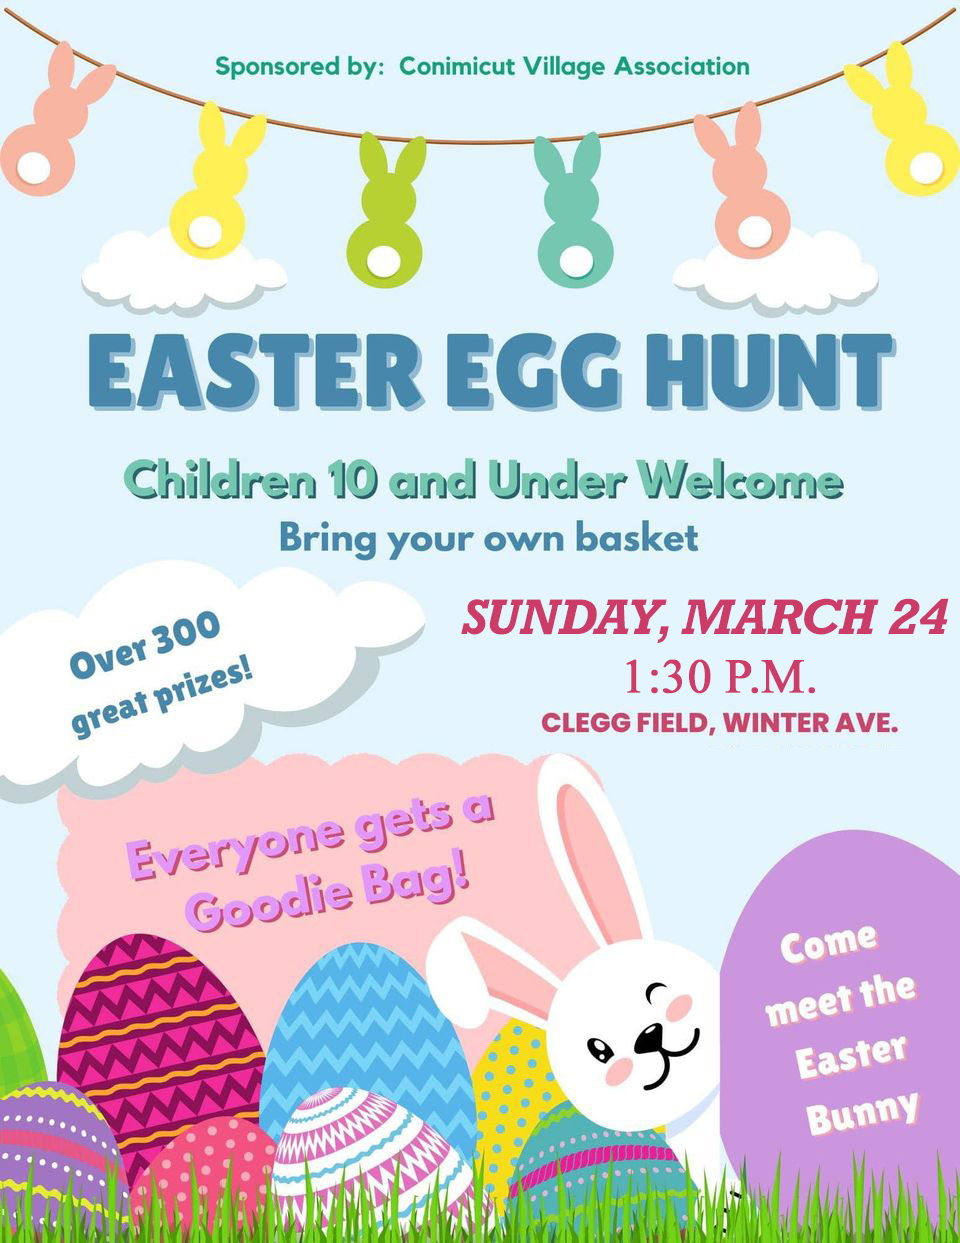 Bring your baskets to the Clegg Field Easter Egg Hunt Sunday at 1:30 p.m. in Conimicut Village.